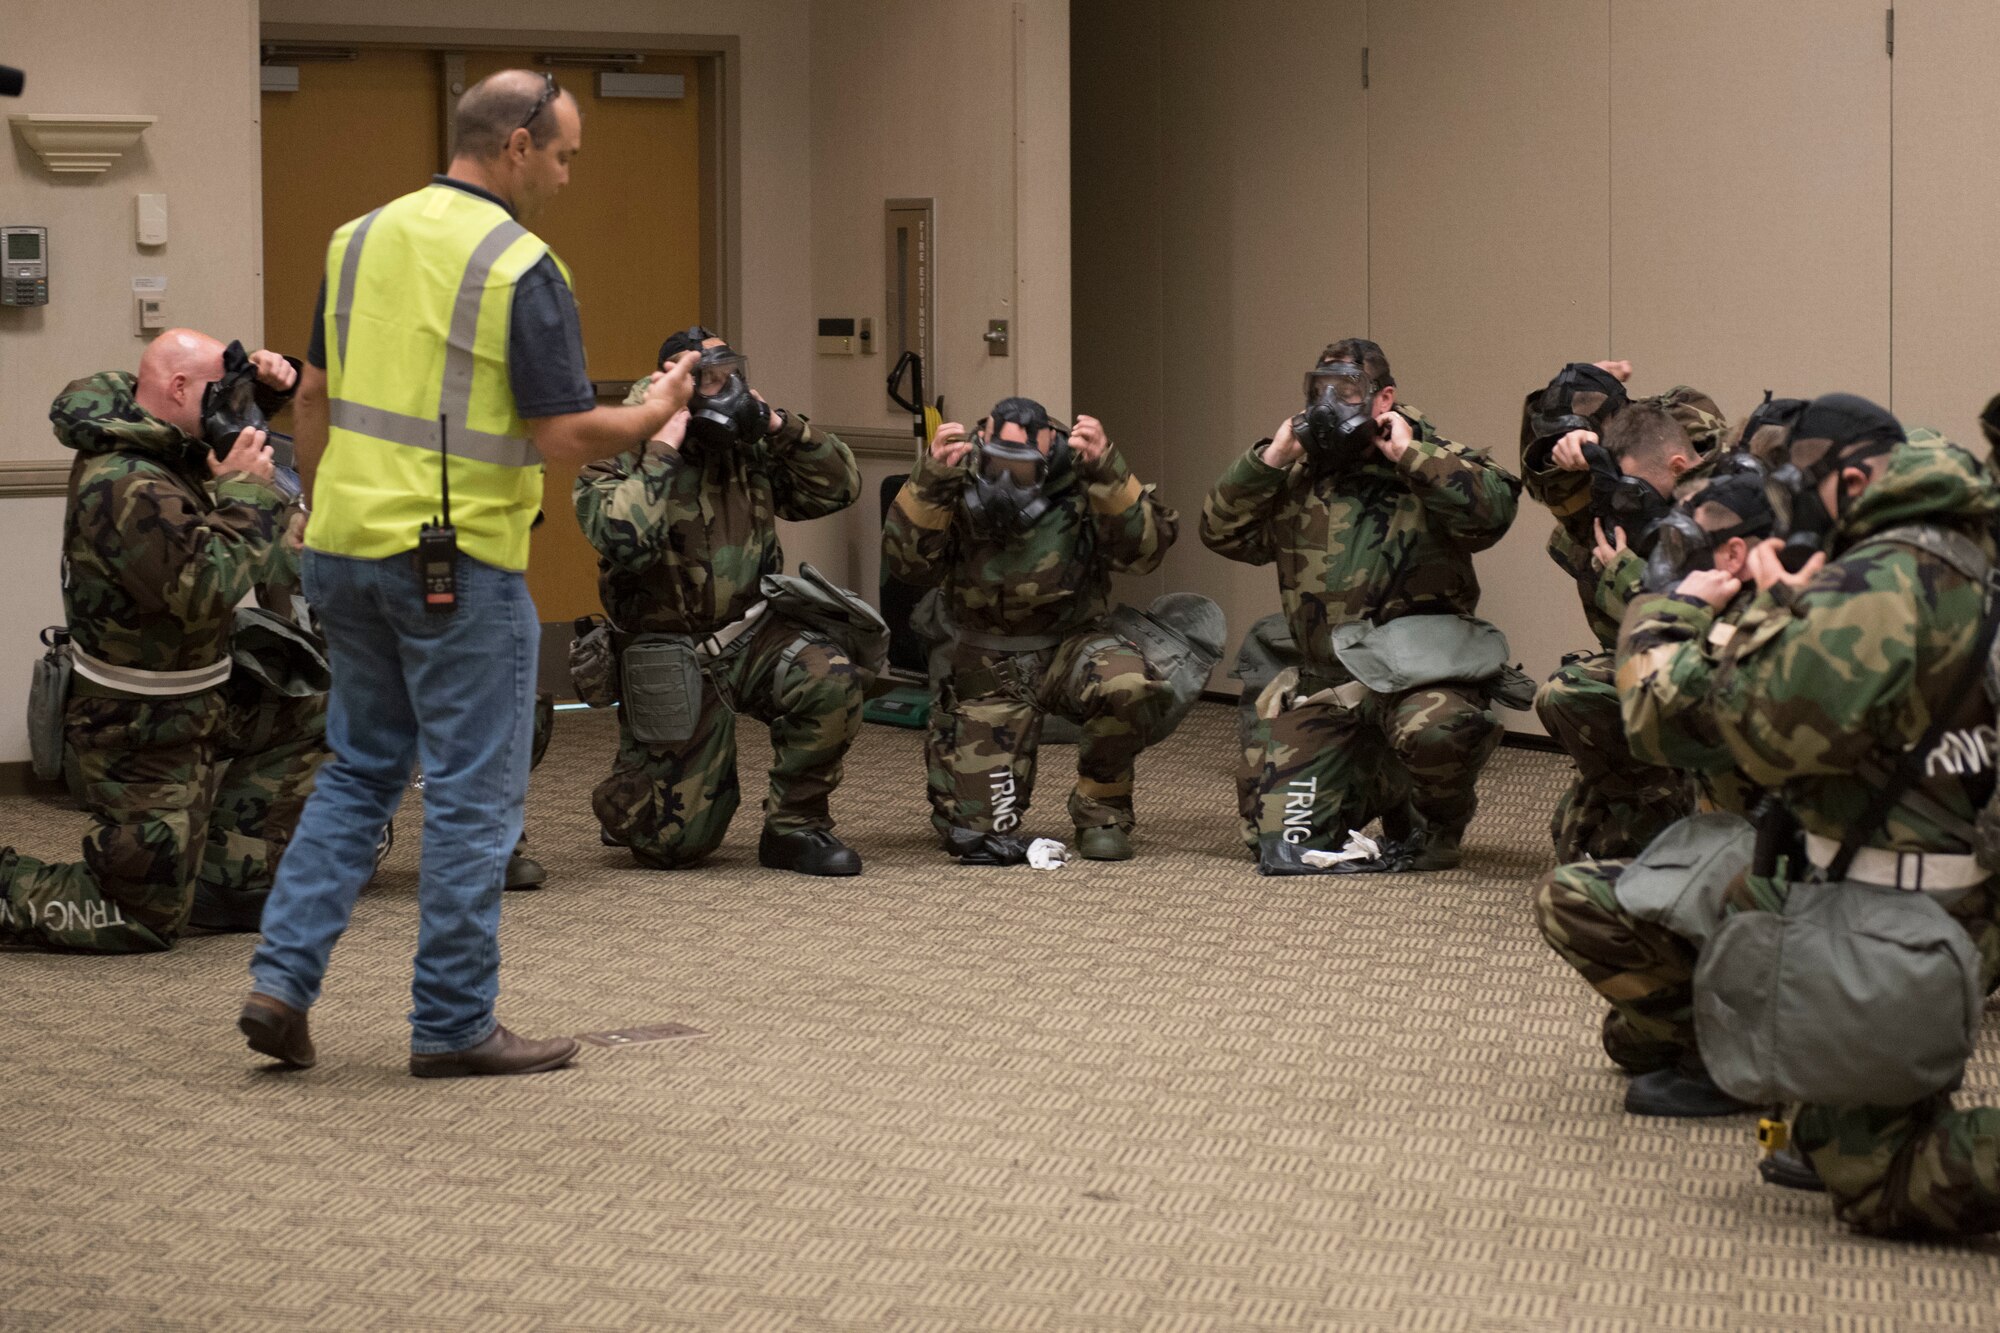 Airmen assigned to the 167th Airlift Wing raced against the clock to don their gas masks during a deployment training exercise at the Alpena Combat Readiness Training Center in Michigan, June 10-14, 2018. Approximately 200 members of the 167th Airlift Wing participated in the event. (U.S. Air National Guard photo by Tech. Sgt. Jodie Witmer)